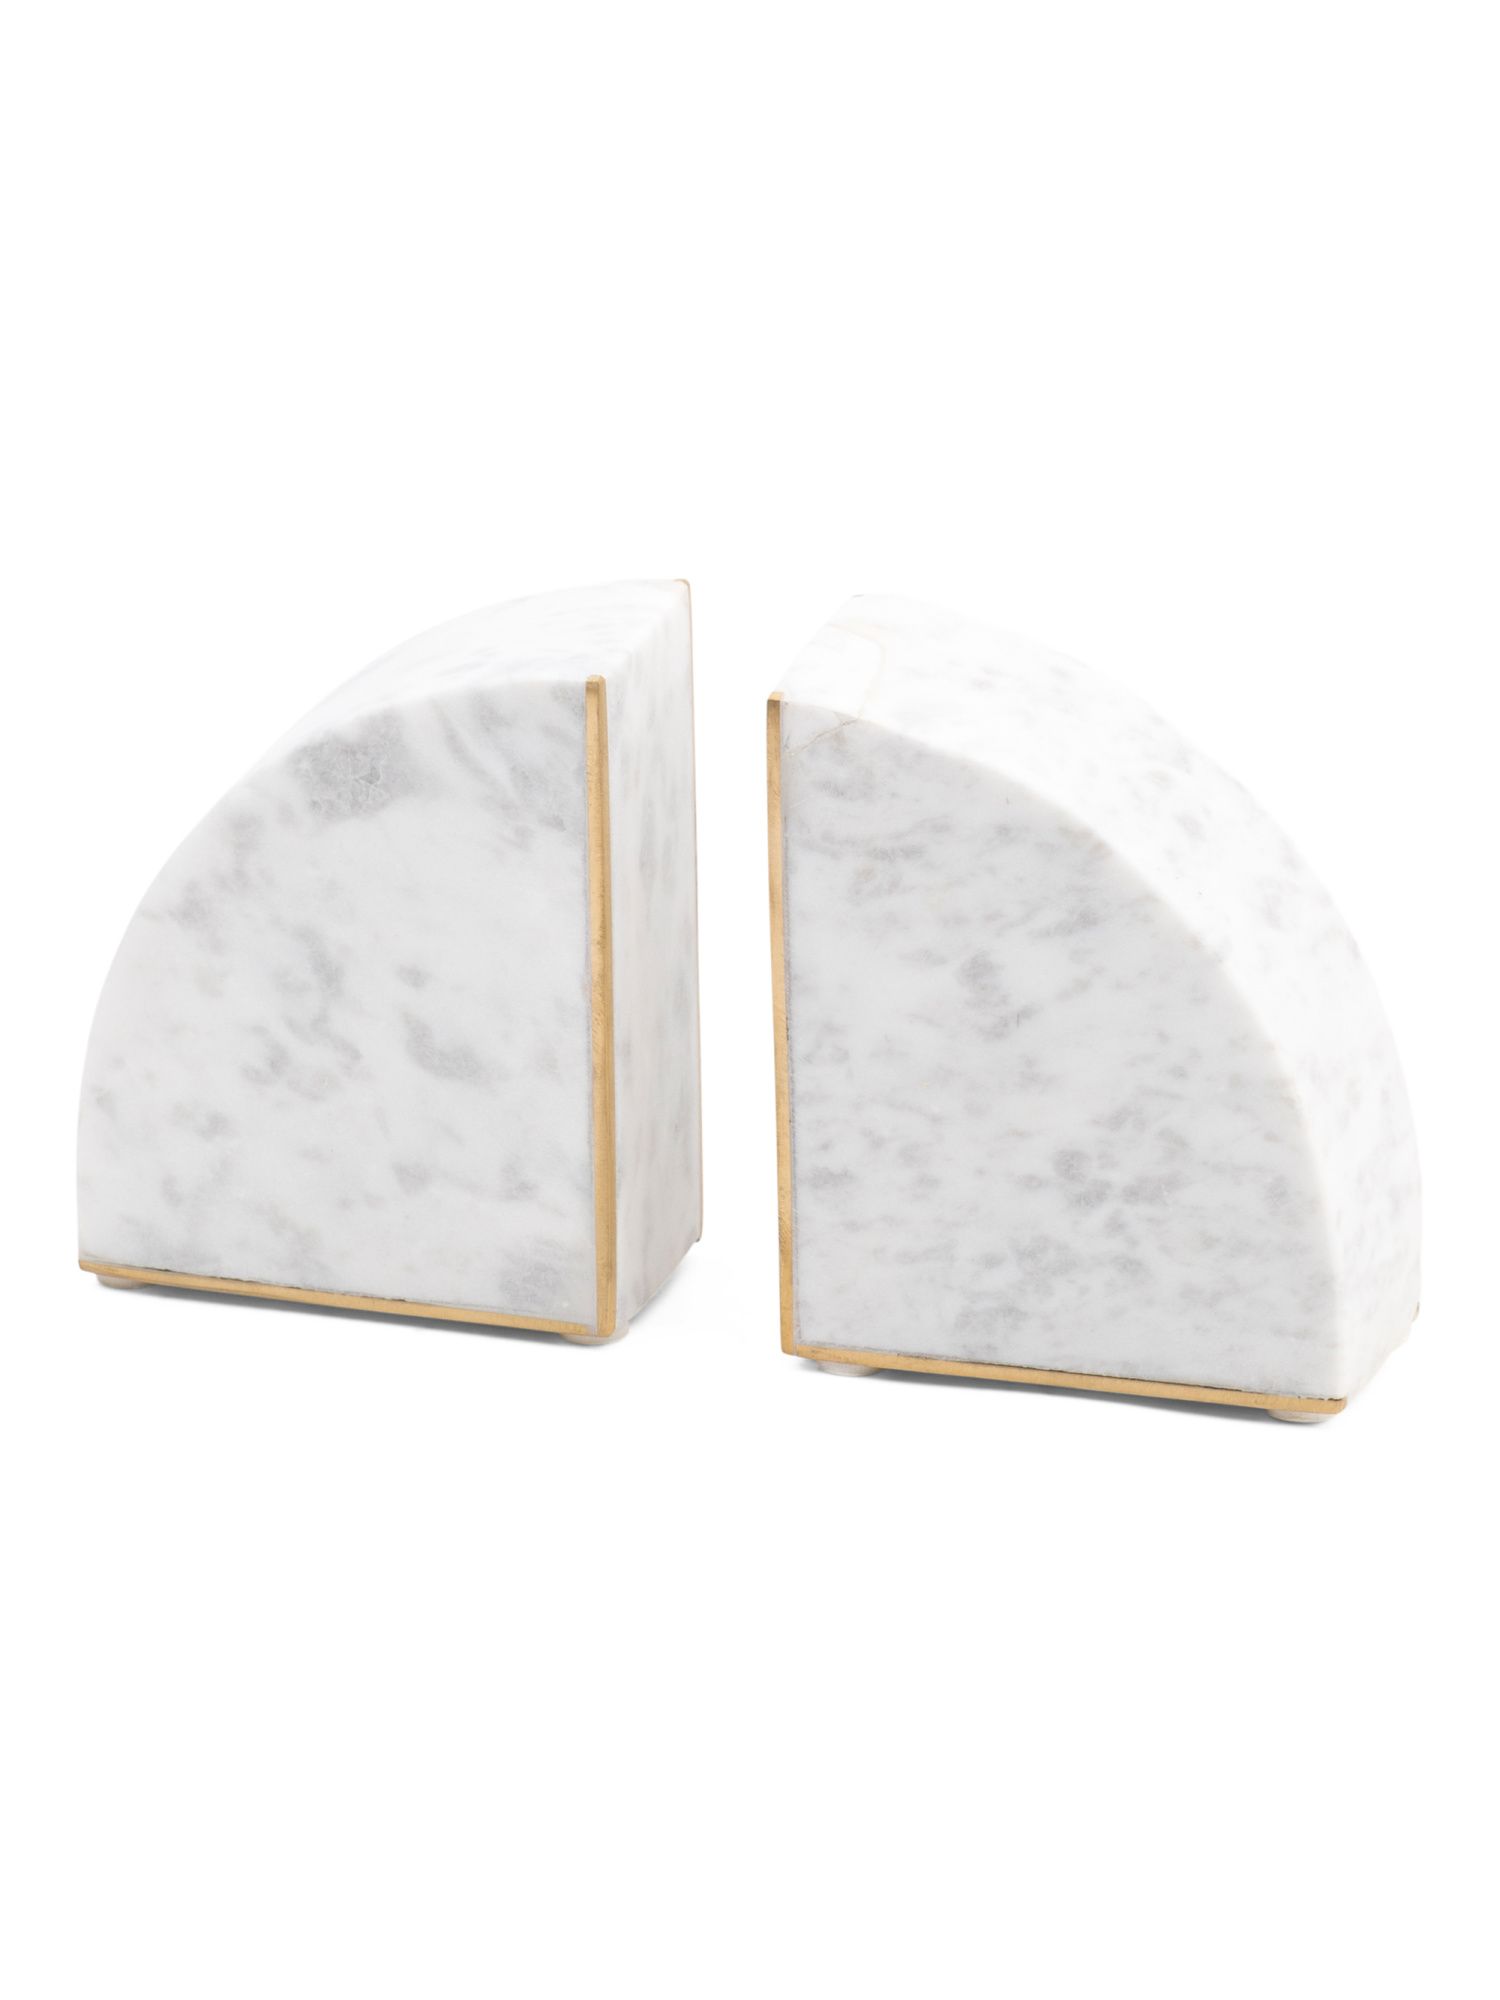 Marble Pie Bookends | Pillows & Decor | Marshalls | Marshalls